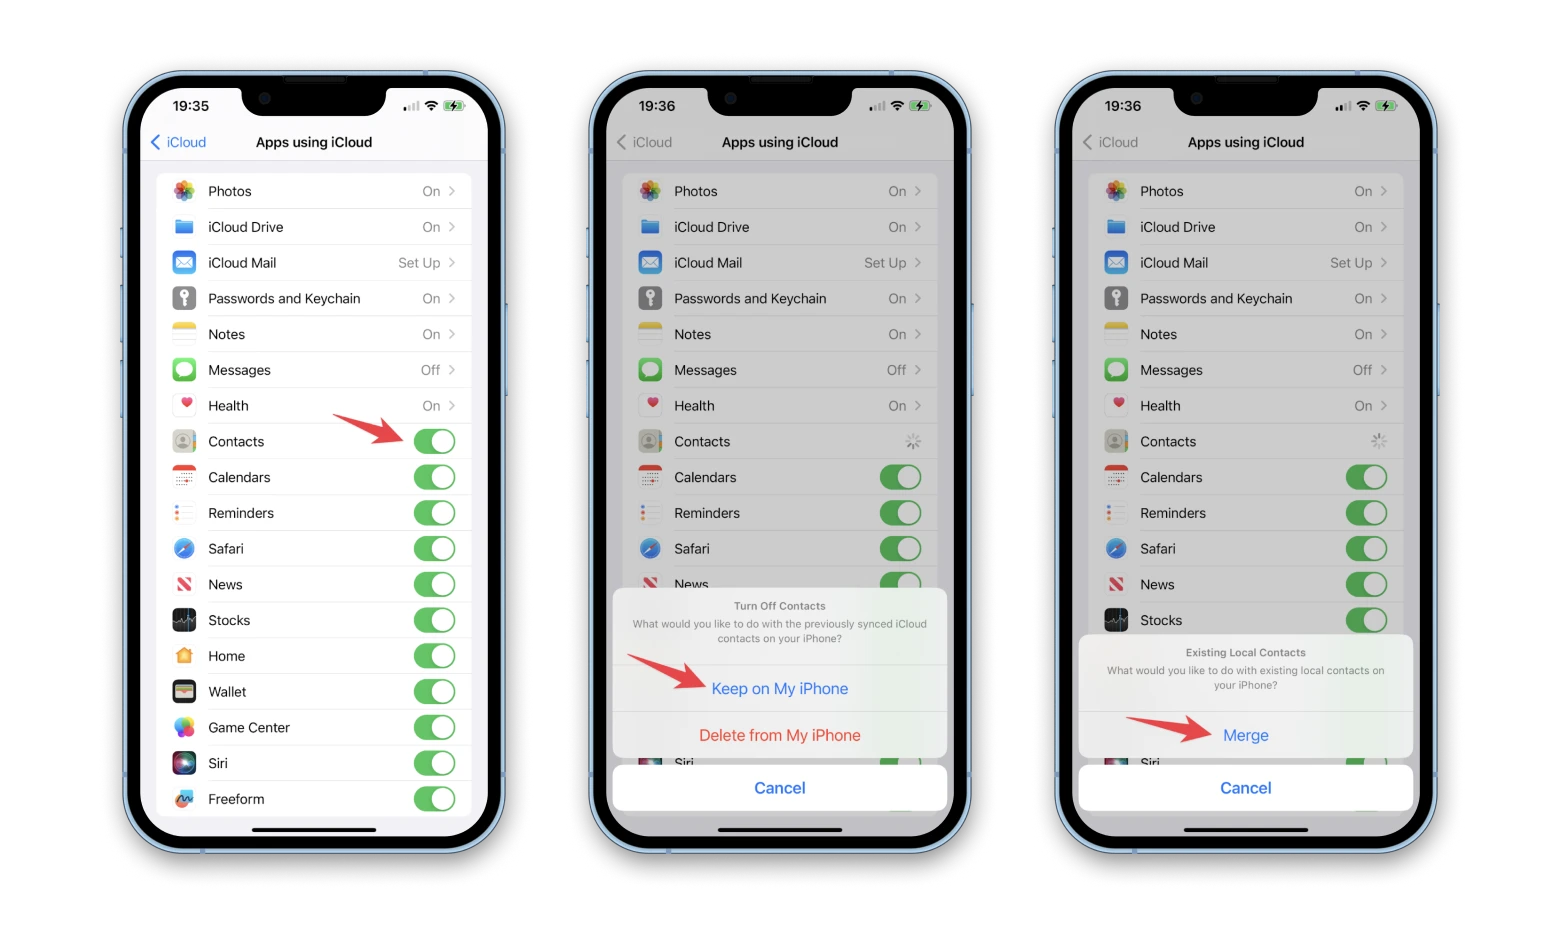 sync the contacts on iCloud with the ones on your iPhone